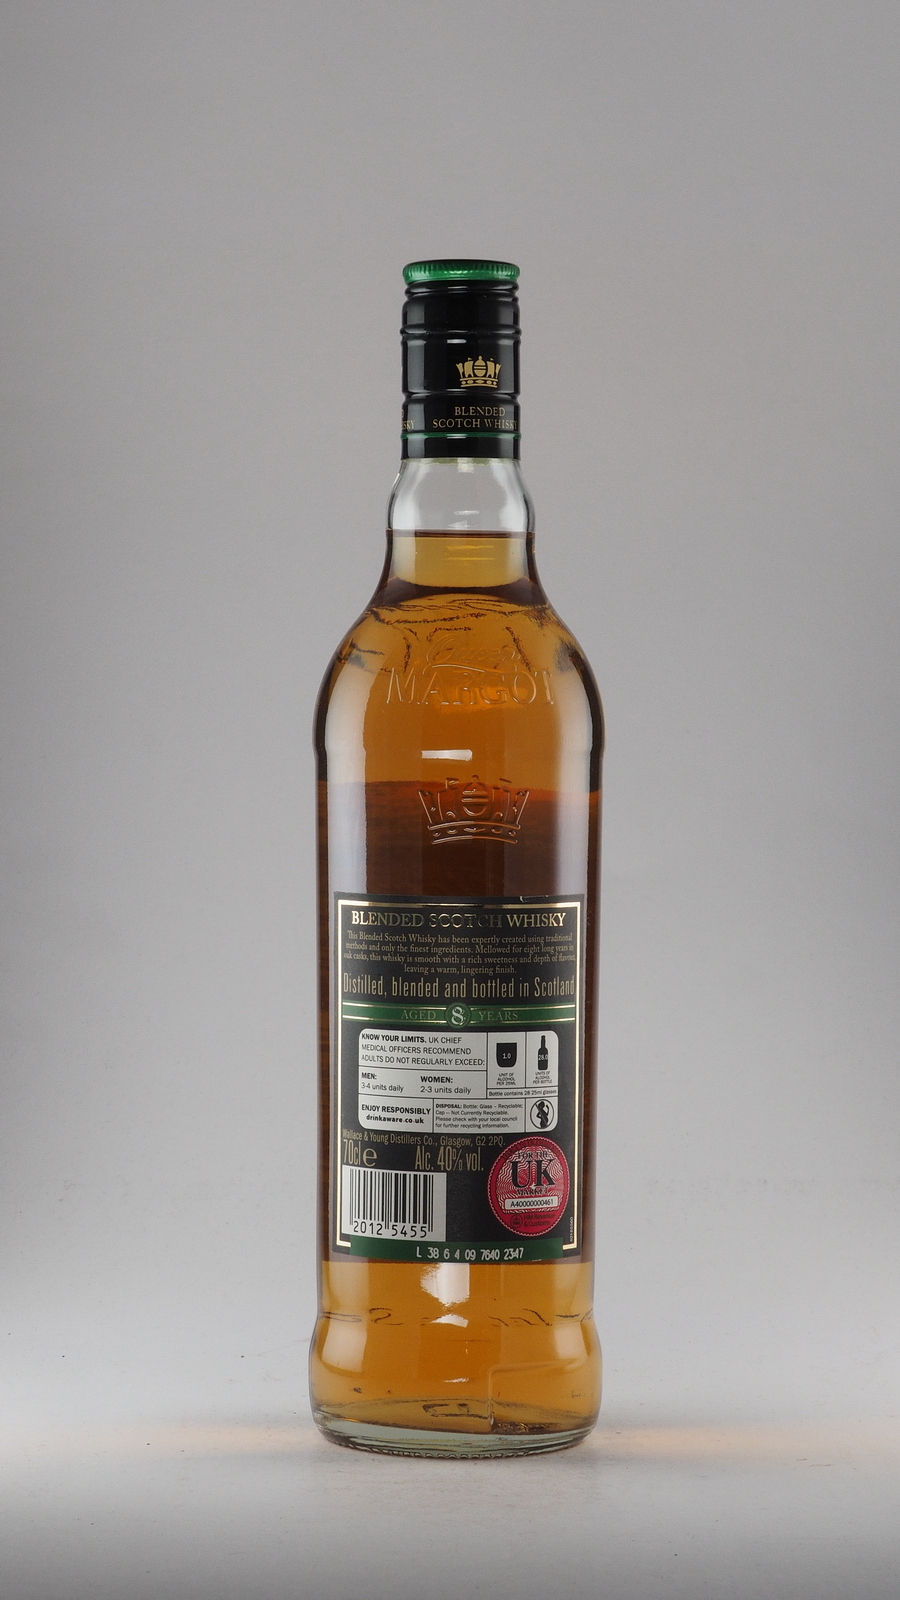 Years Szeni Whisky 8 – Collection Queen Margot